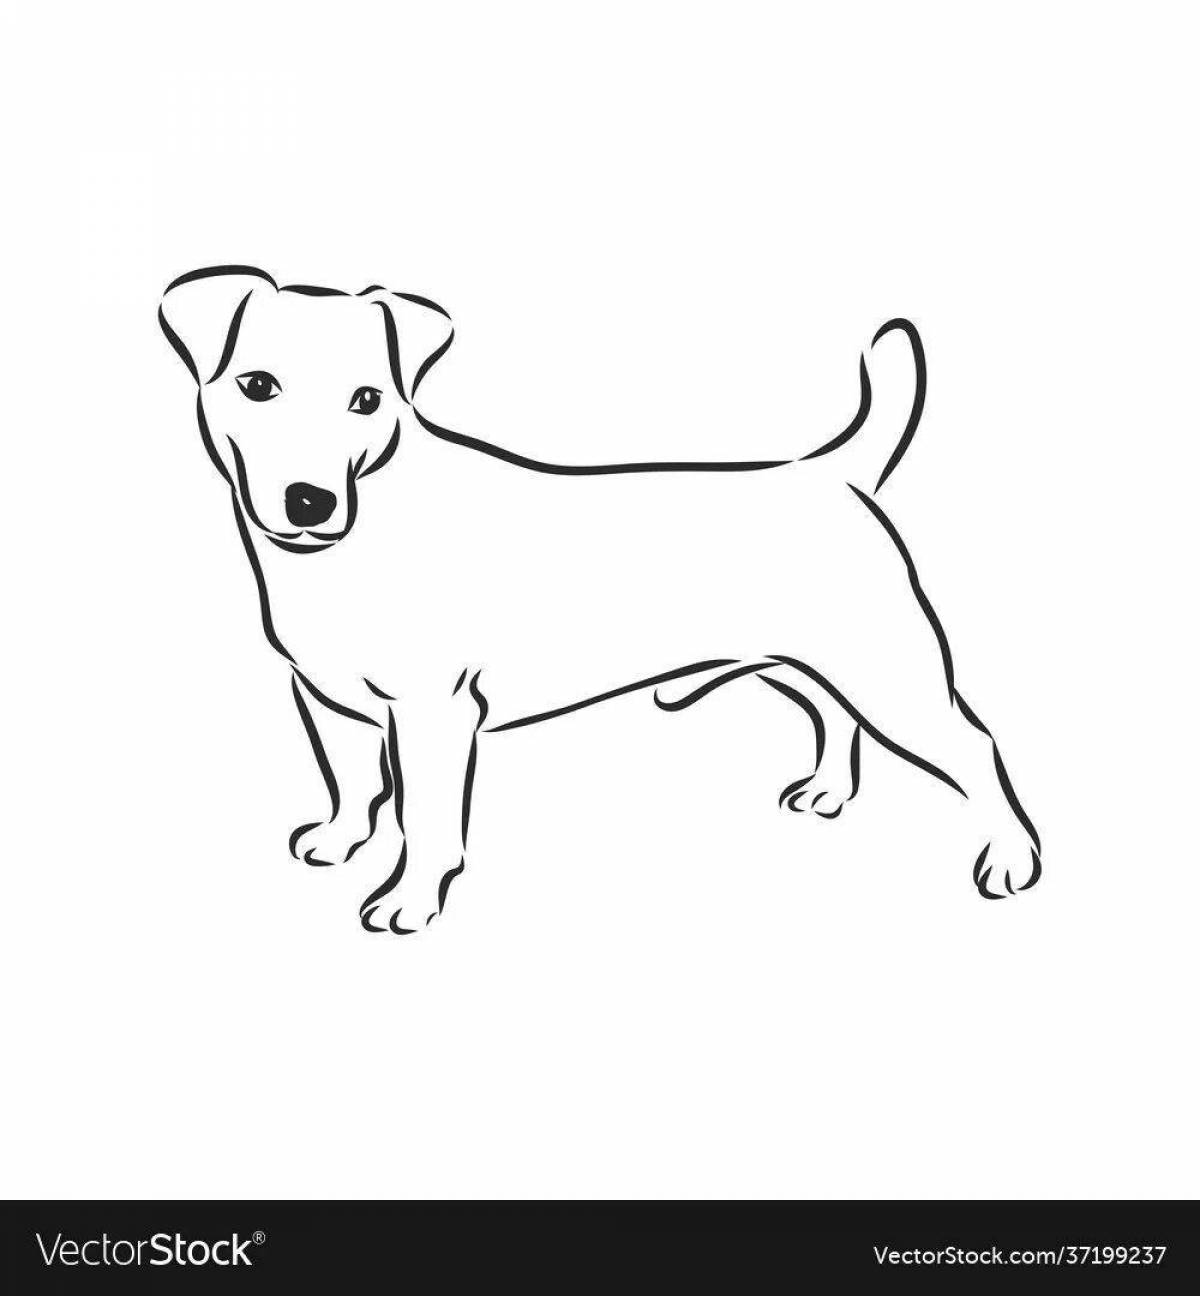 Jack Russell Terrier dog coloring page